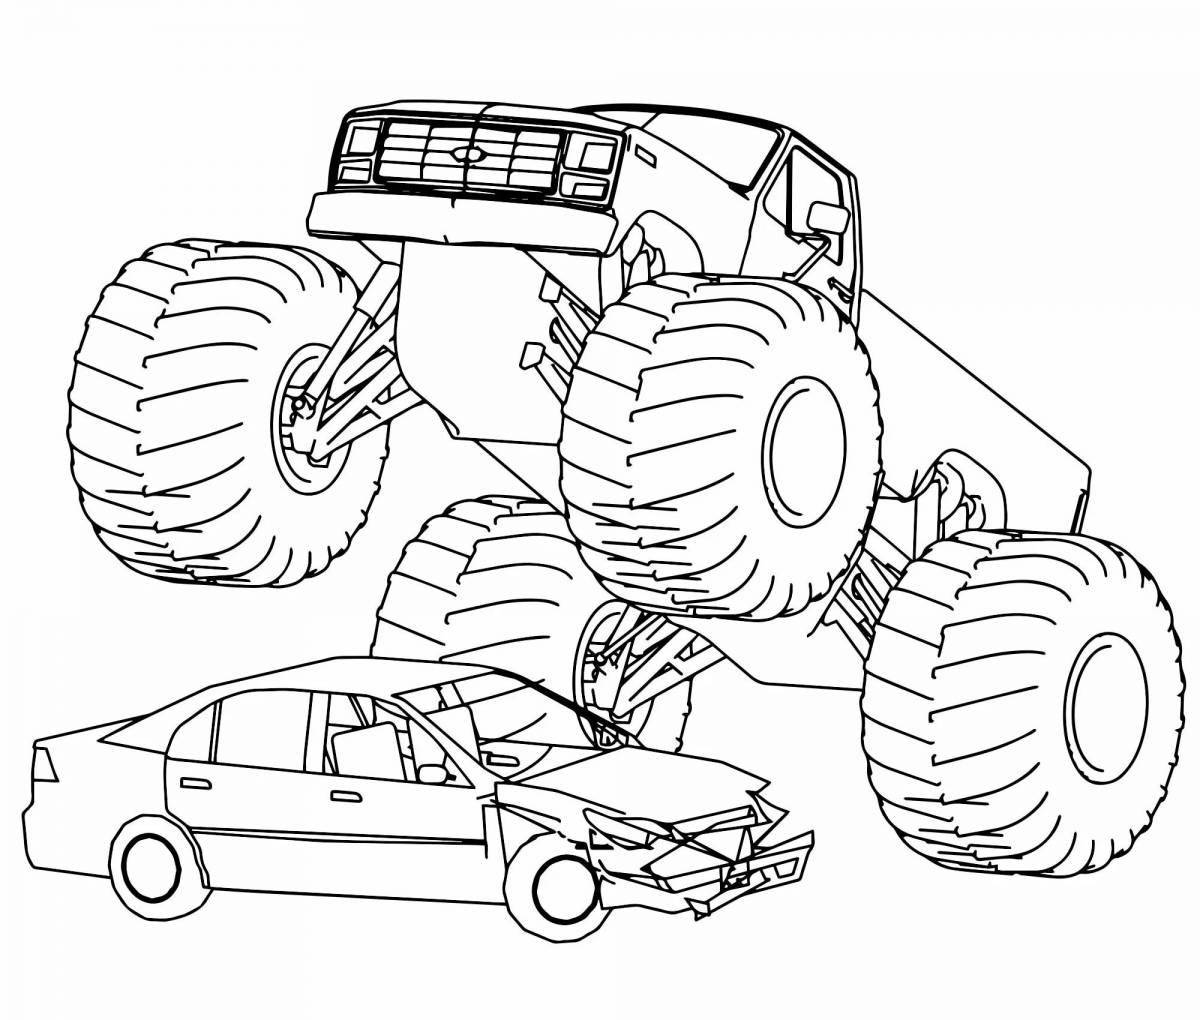 Playful monster truck coloring page for 3-4 year olds